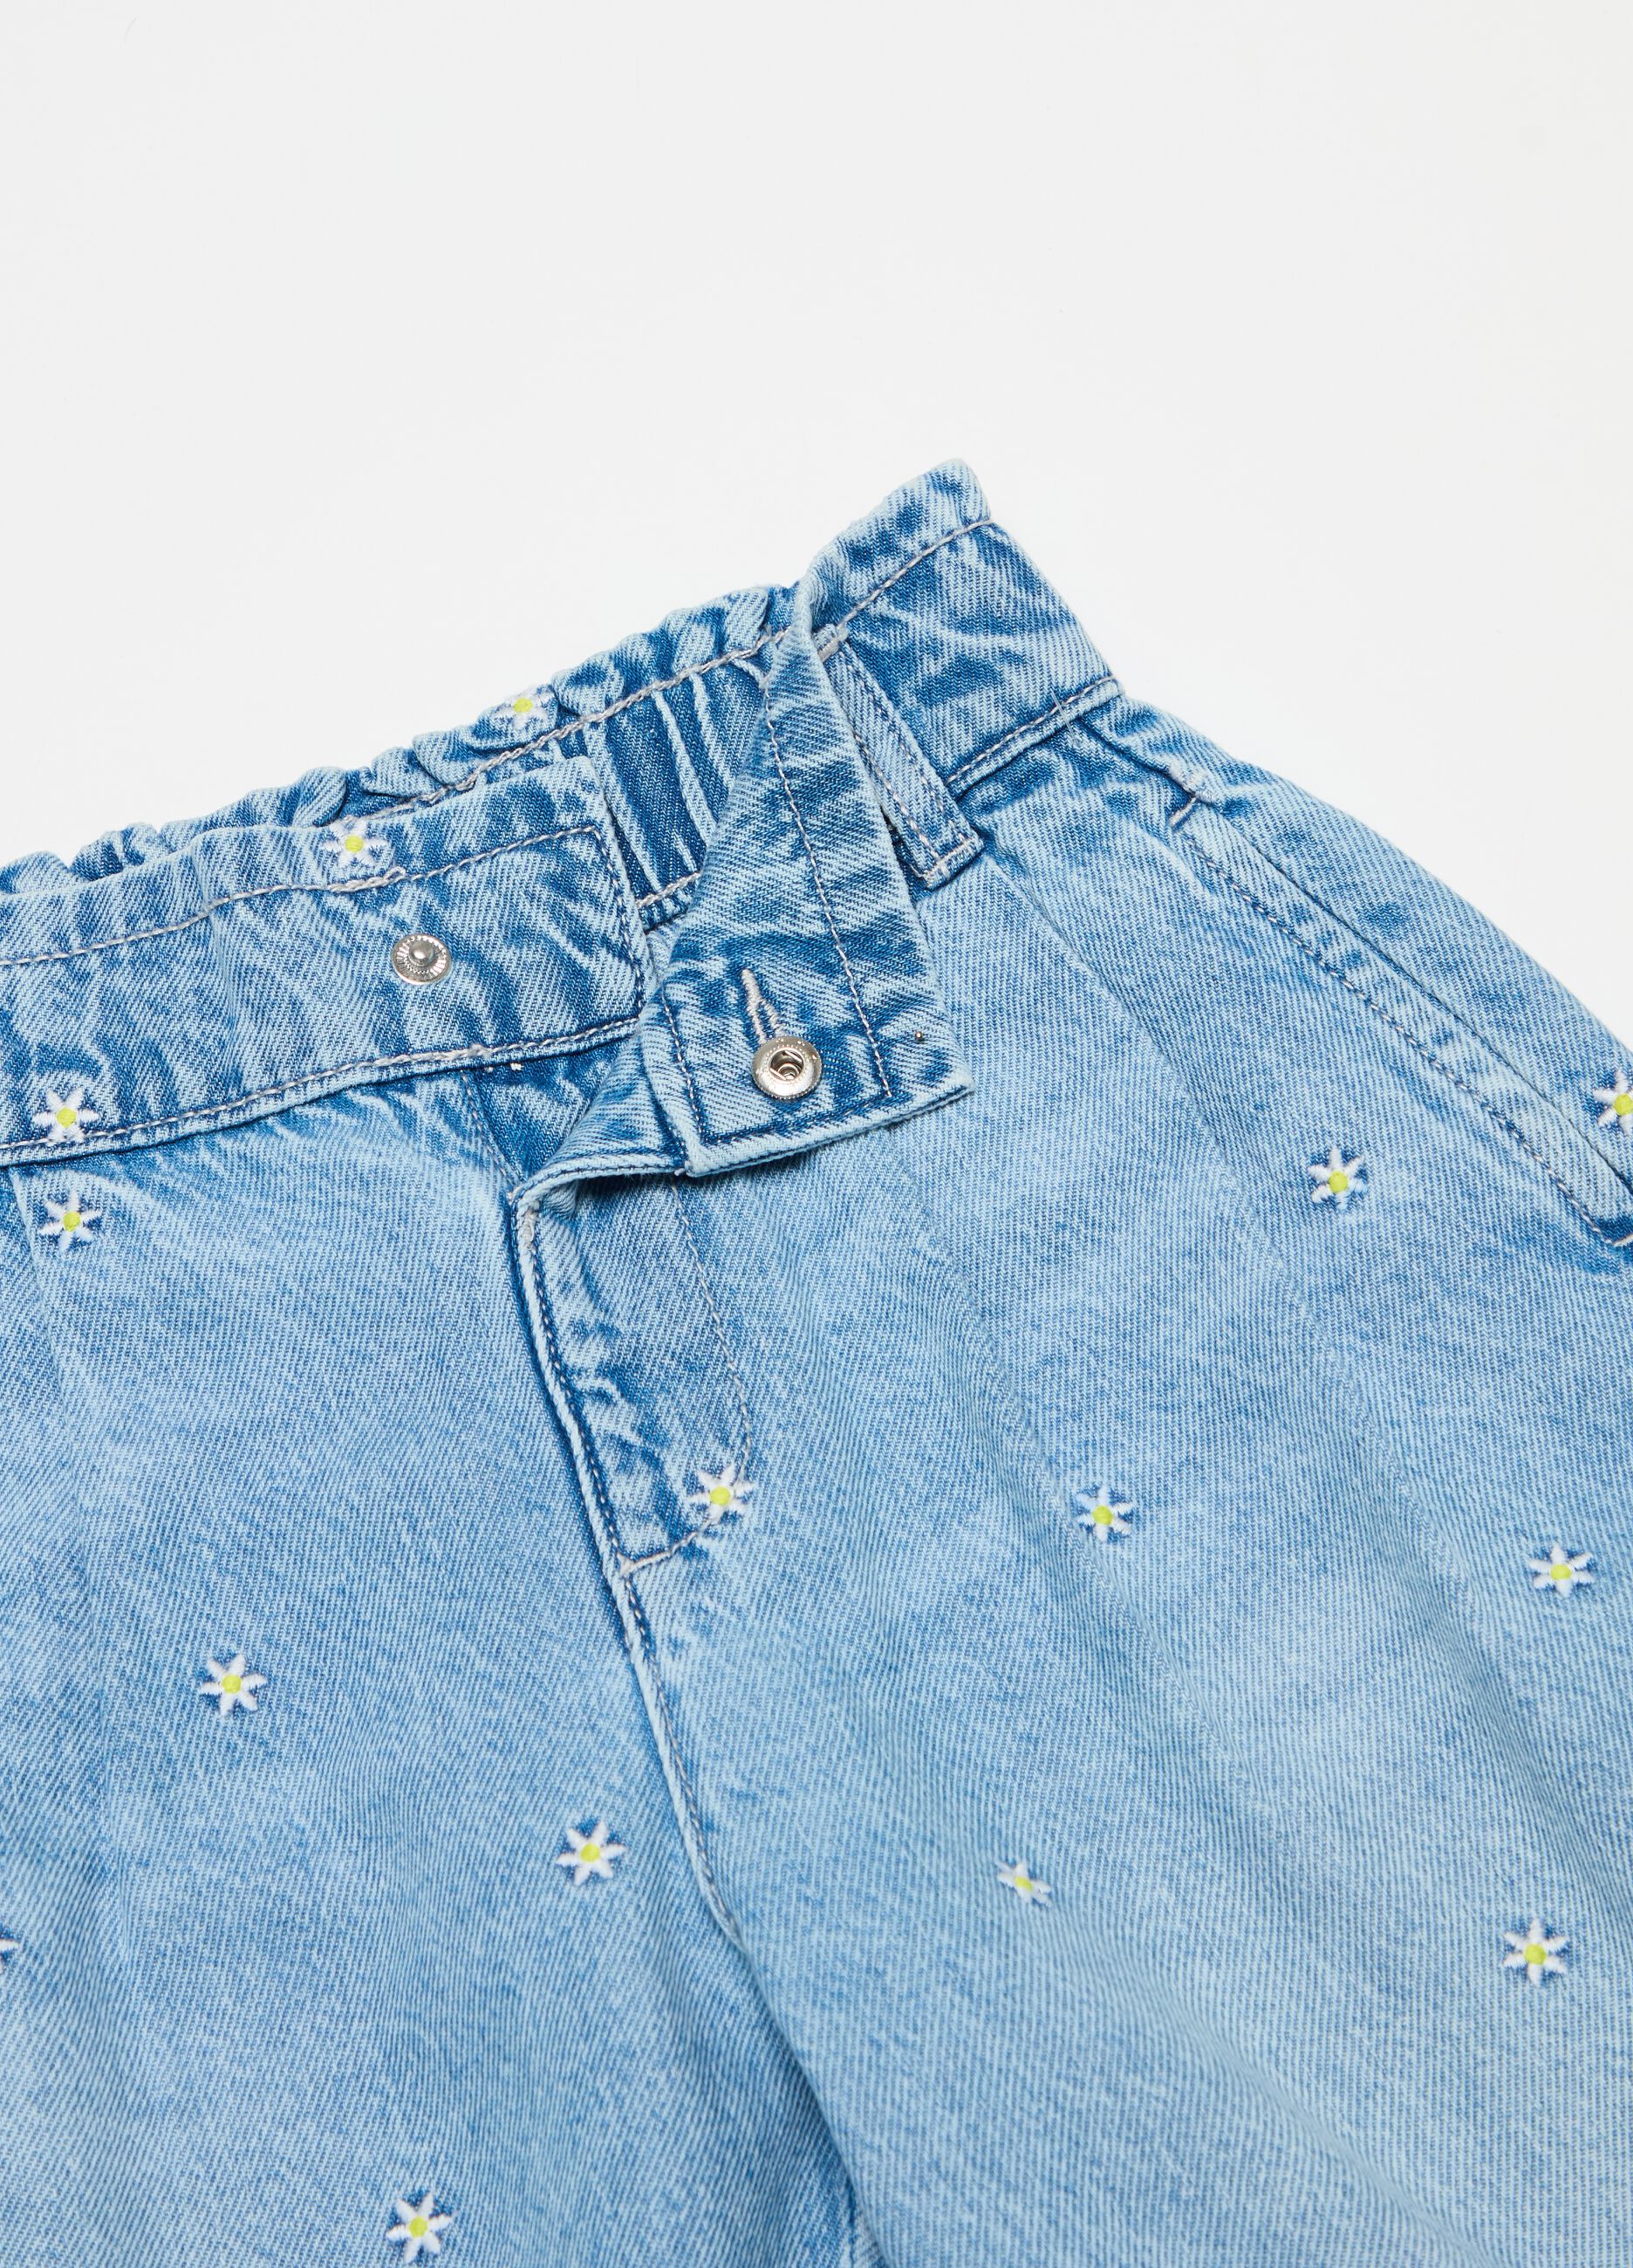 Cropped jeans with small flowers embroidery